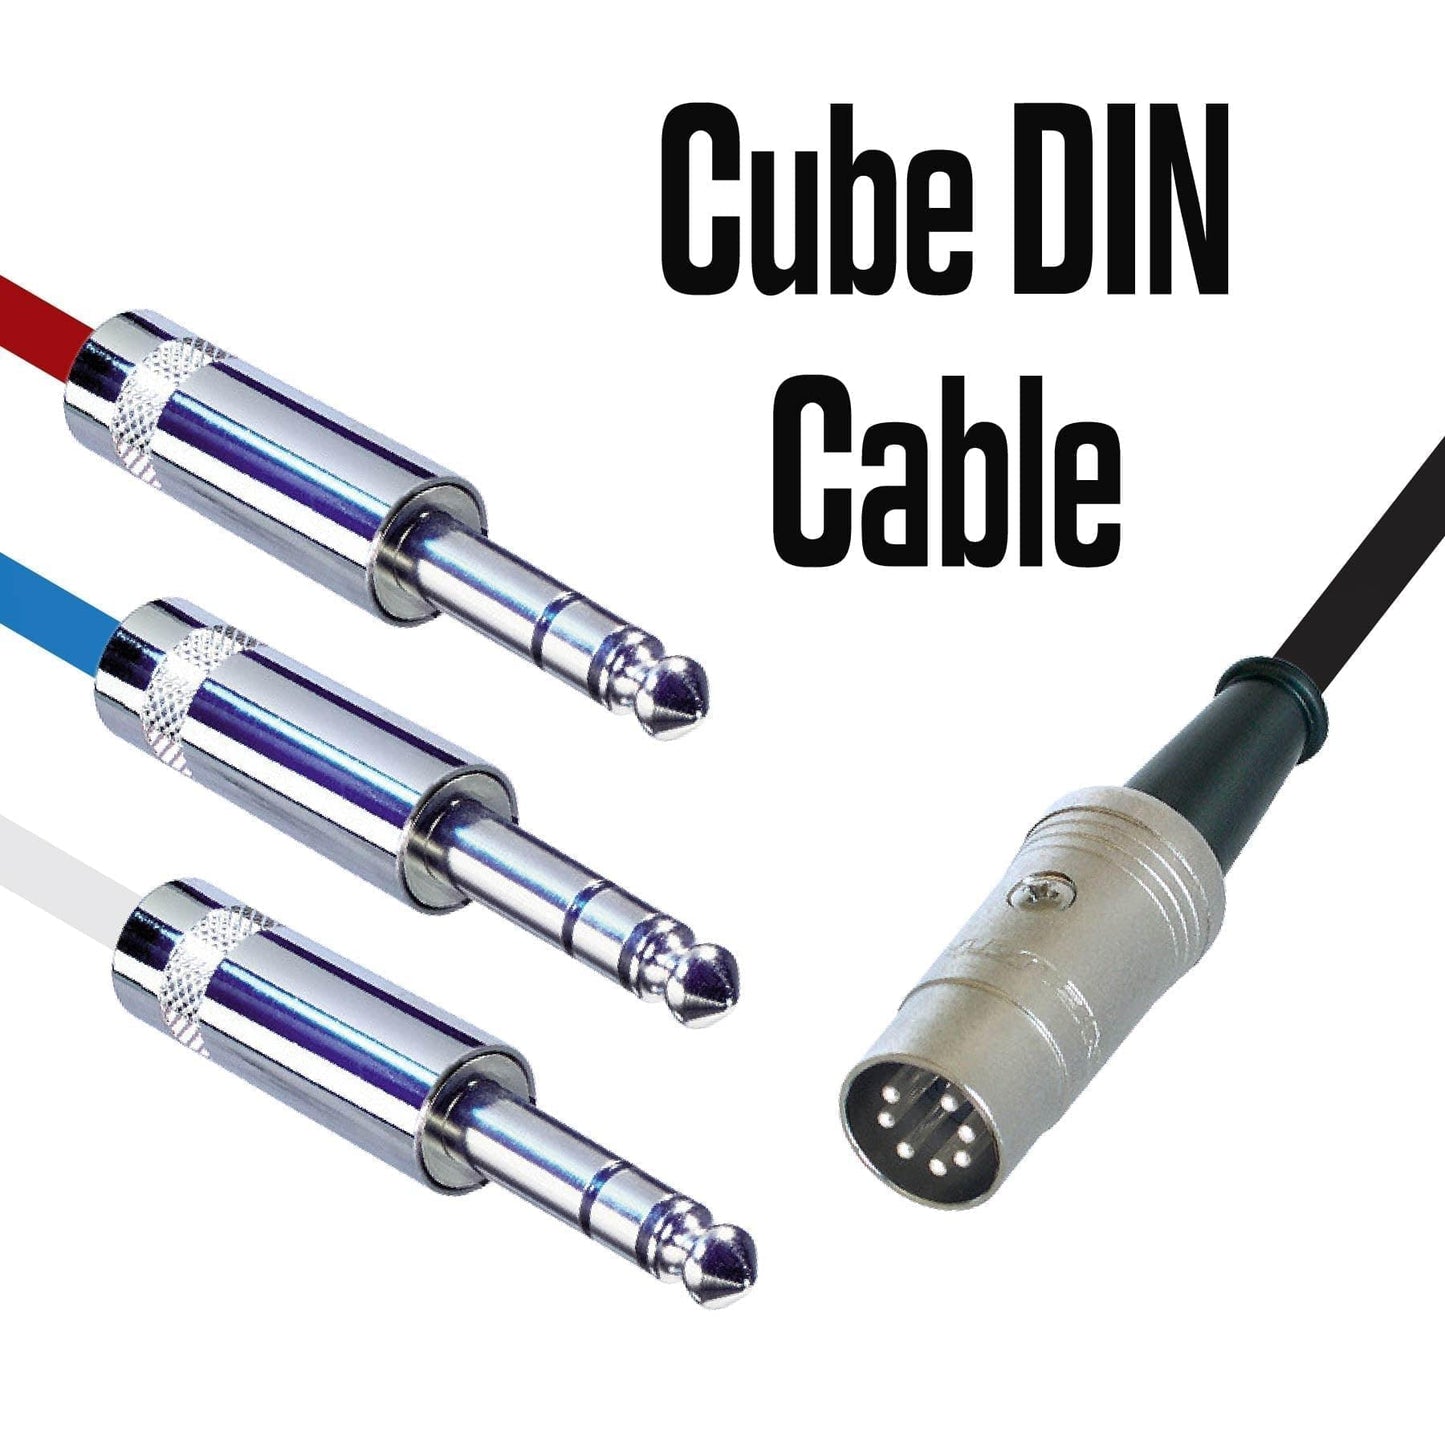 3m Cube DIN Cable